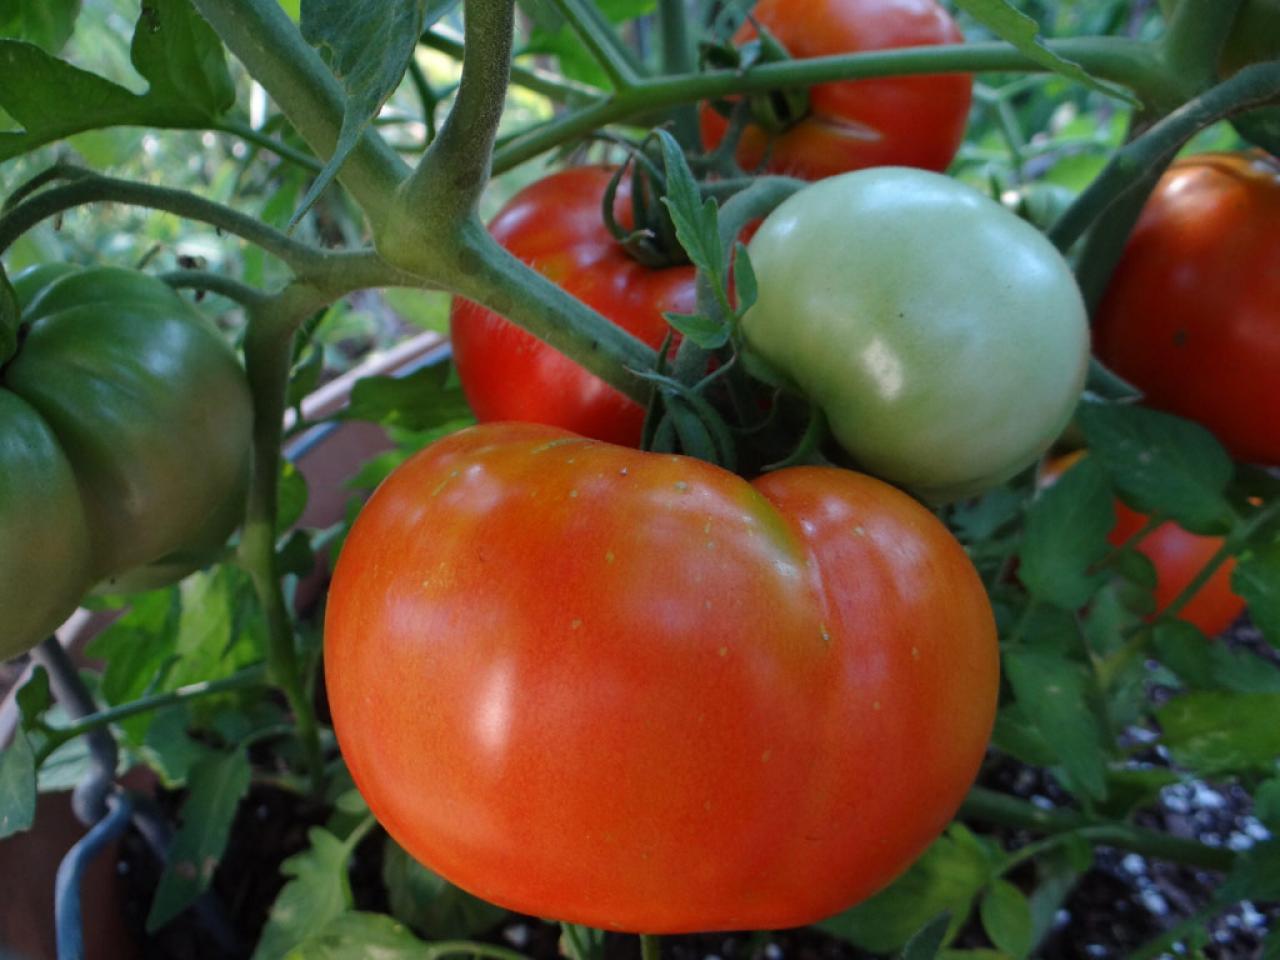 How Tomato Growers Adapted to Unpredictable Weather and Had a Successful Season in Nebraska